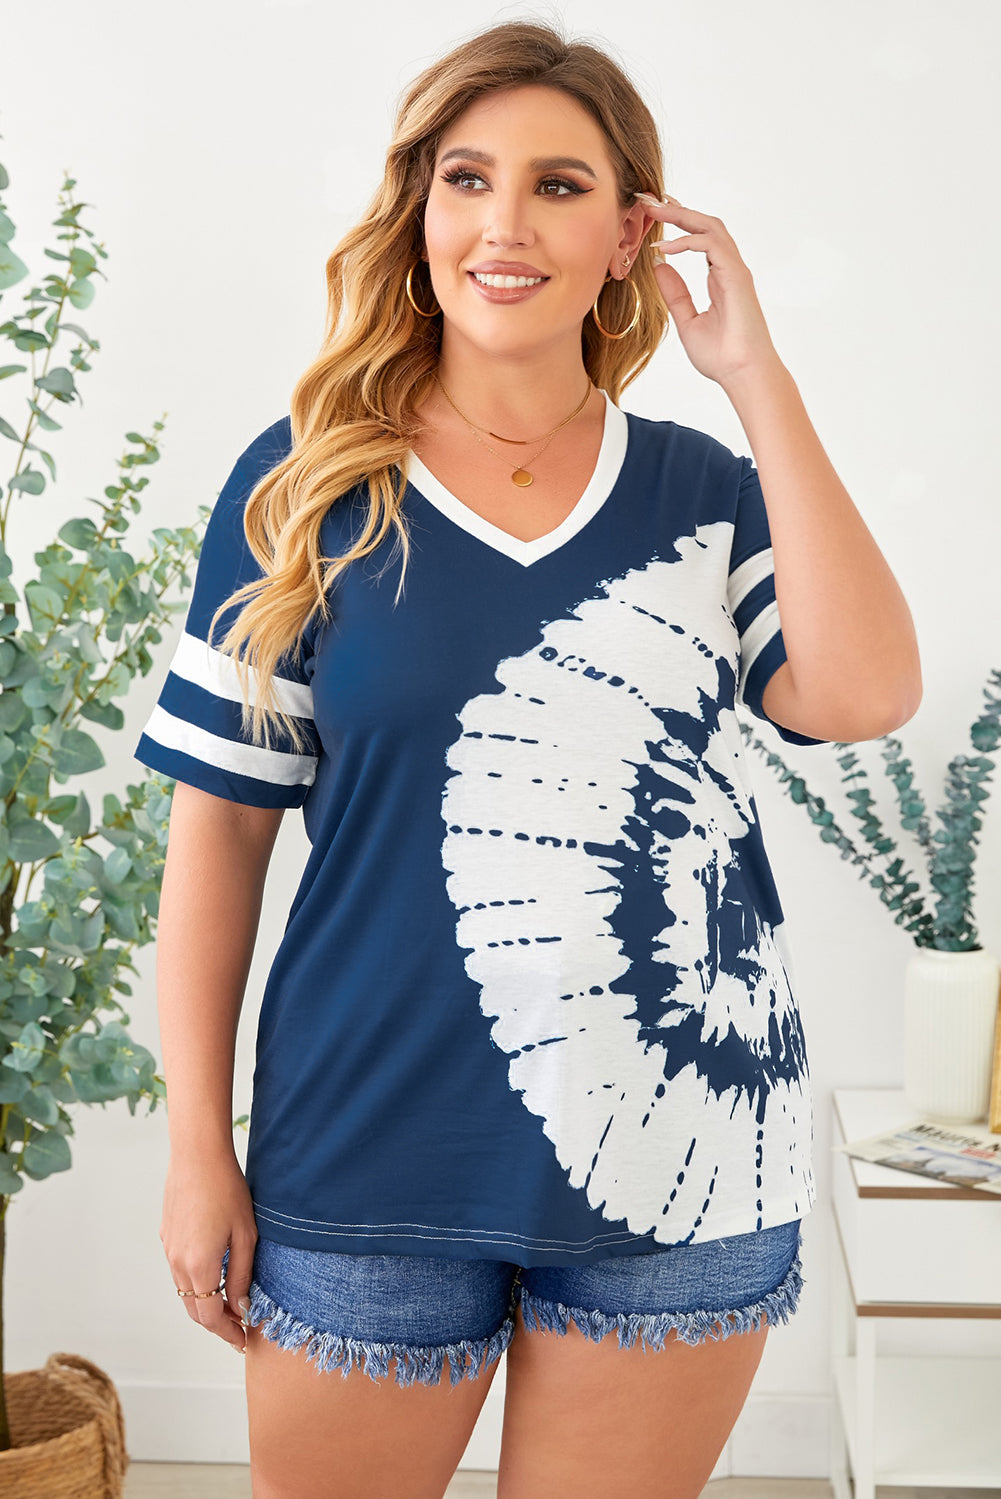 Surfing Into the Blue Tie-Dye V-Neck Tee Shirt